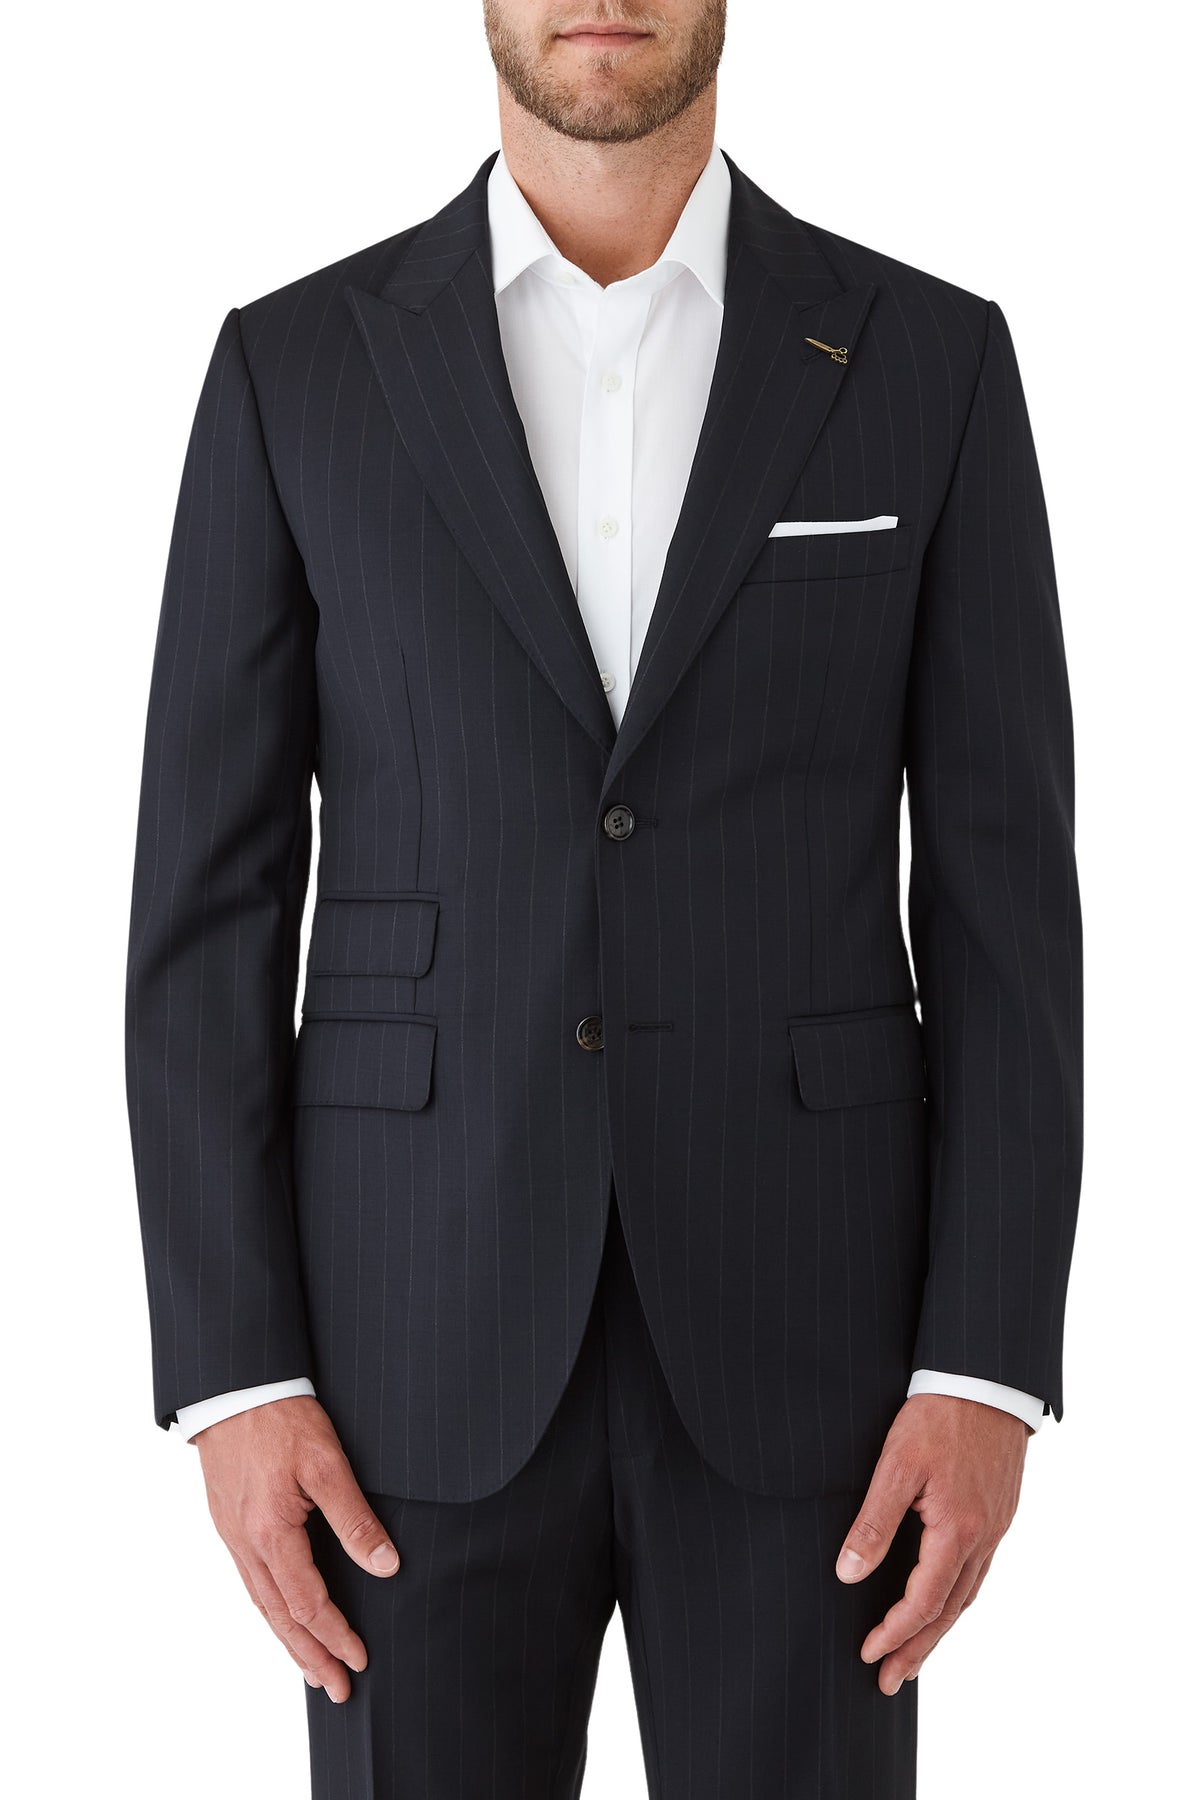 FJR807 Navy - Convoy Jacket  https://harrysformenswear.com.au/products/fjr807-navy-convoy-jacket  BEYOND CITY LIMITS Ready to break a few boundaries? Swagger into the CBDfor a corporate coup in Joe’s three-piece power suit.Swap your jacket for a corduroy blazer and schmoozeyour way into that members only country club.Downtown, out-of-town and everywhere in between,nowhere is off limits when you’re dressed in Joe Bl…